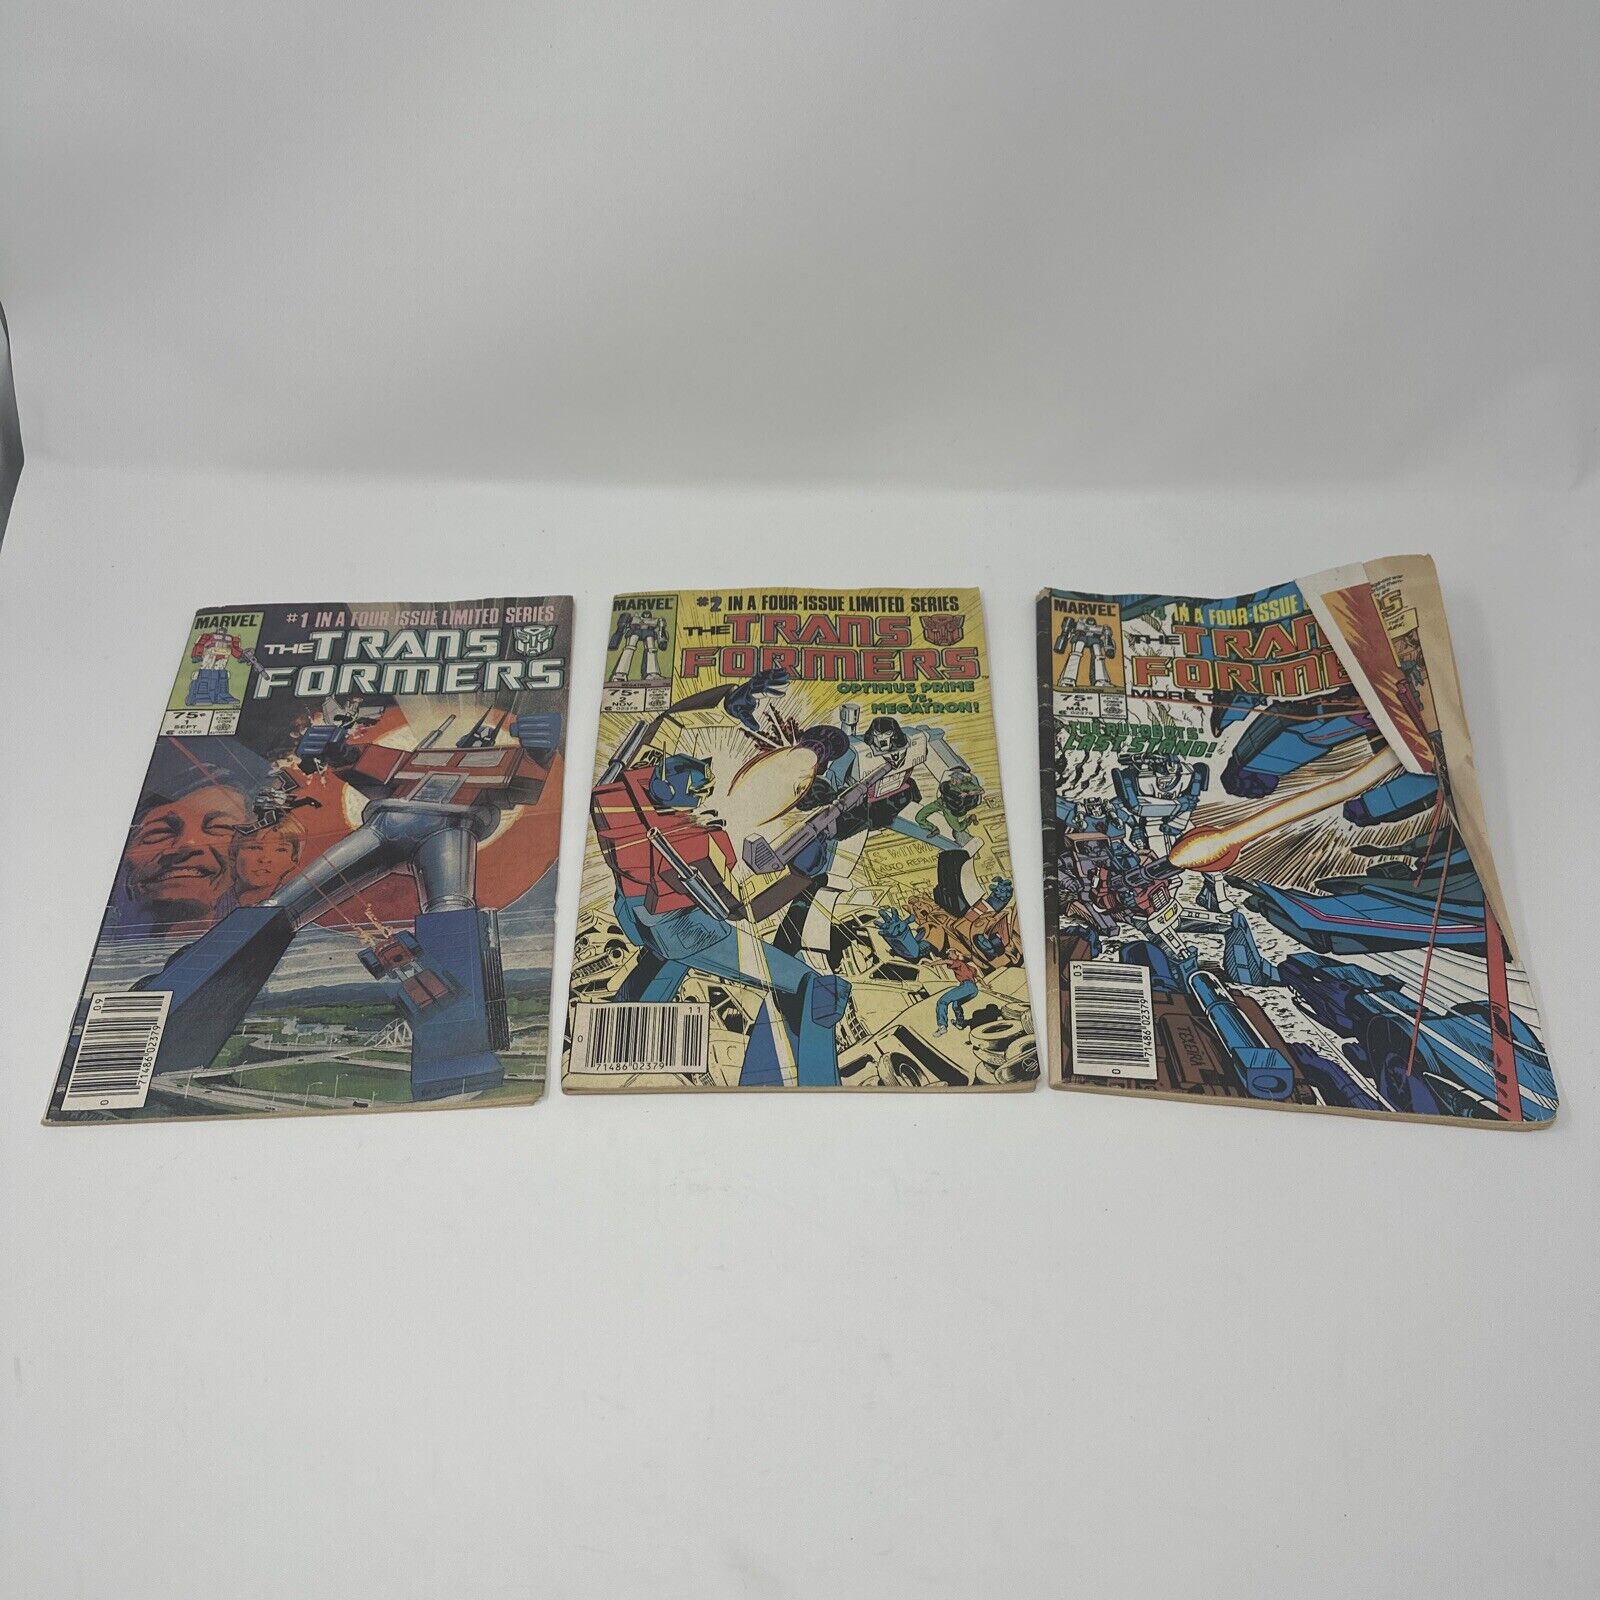 The Transformers #1 #2 #4 in a Four Issue Limited Series 3/4 Set 1984 MISSING #3